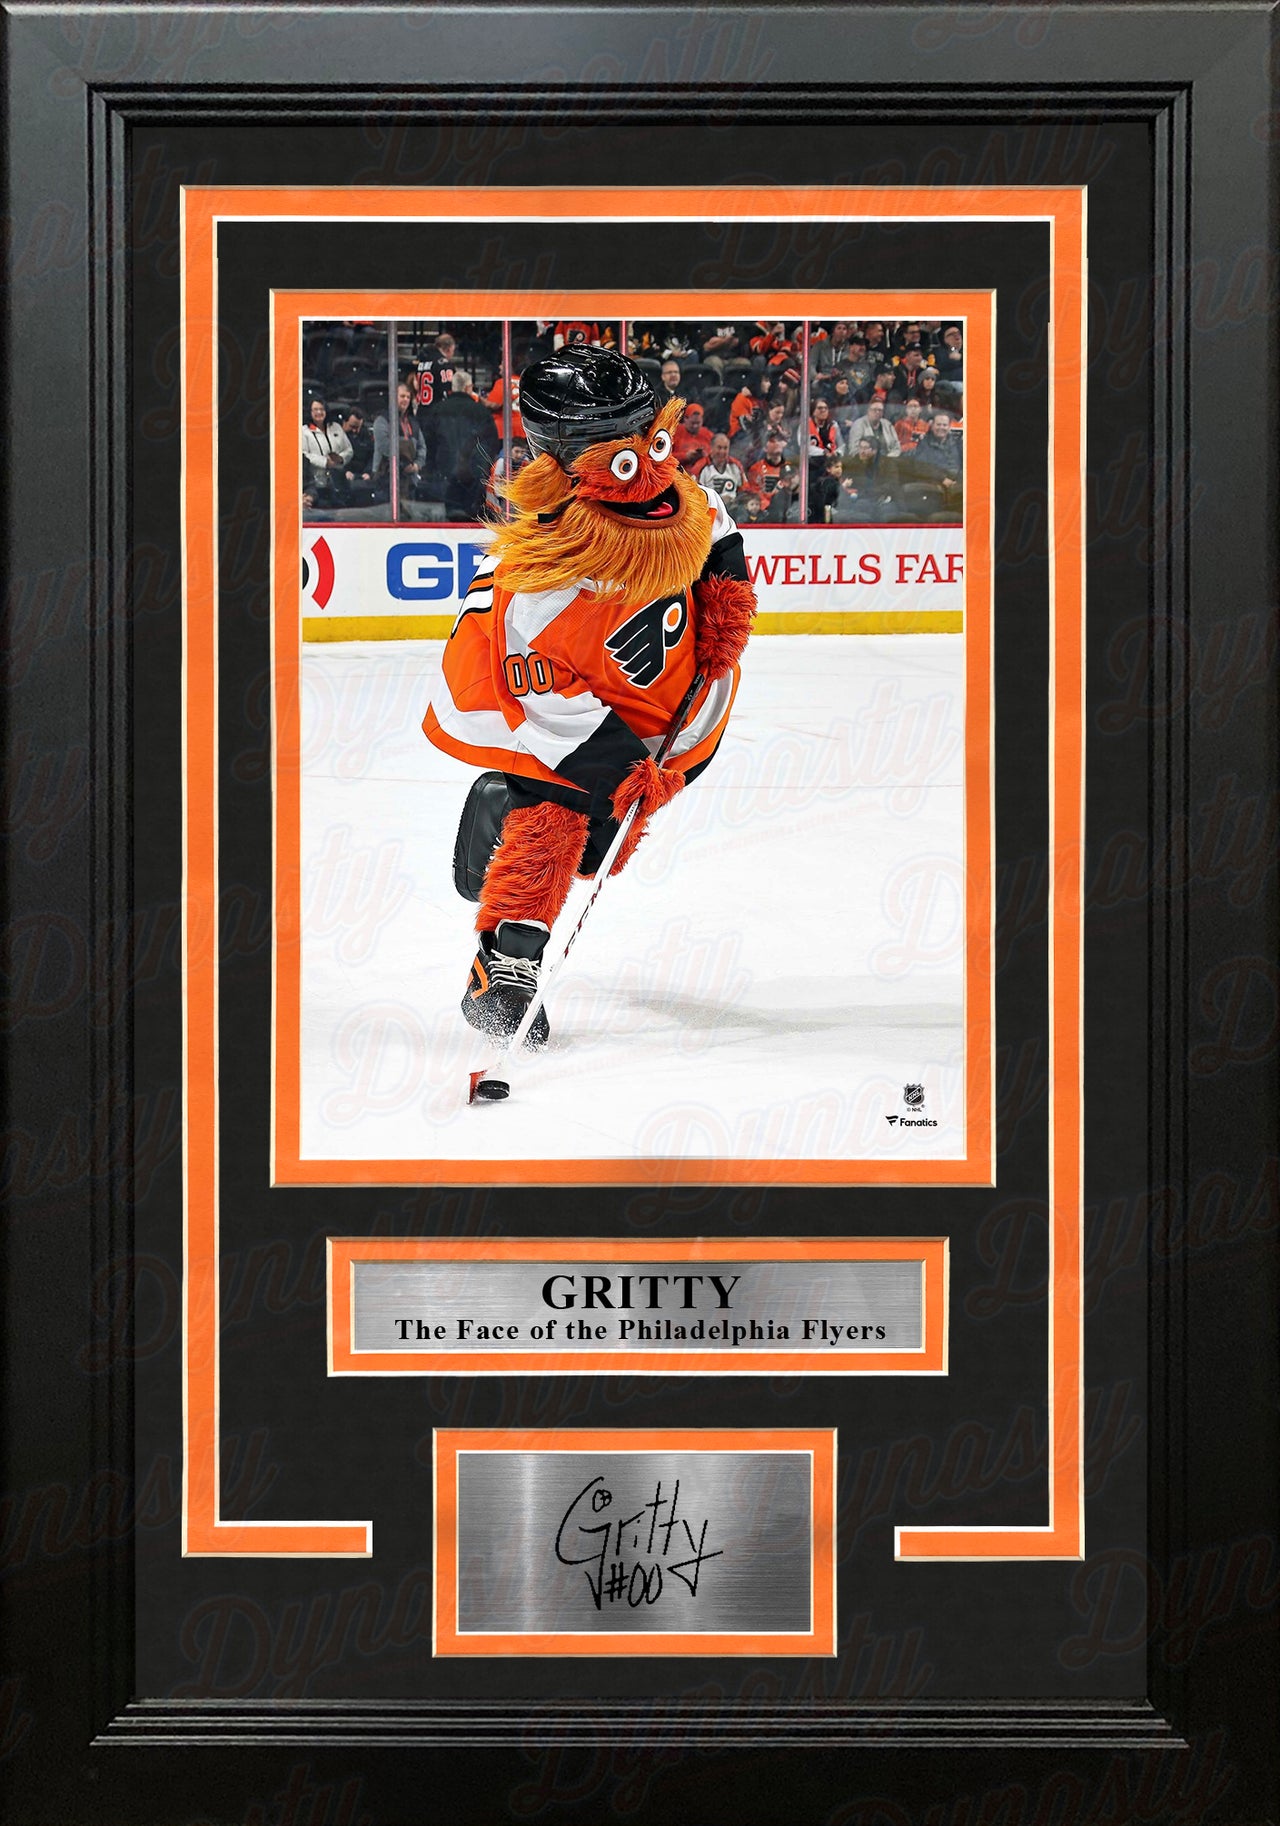 Gritty Skating Down the Ice Philadelphia Flyers 8" x 10" Framed Hockey Mascot Photo with Engraved Autograph - Dynasty Sports & Framing 